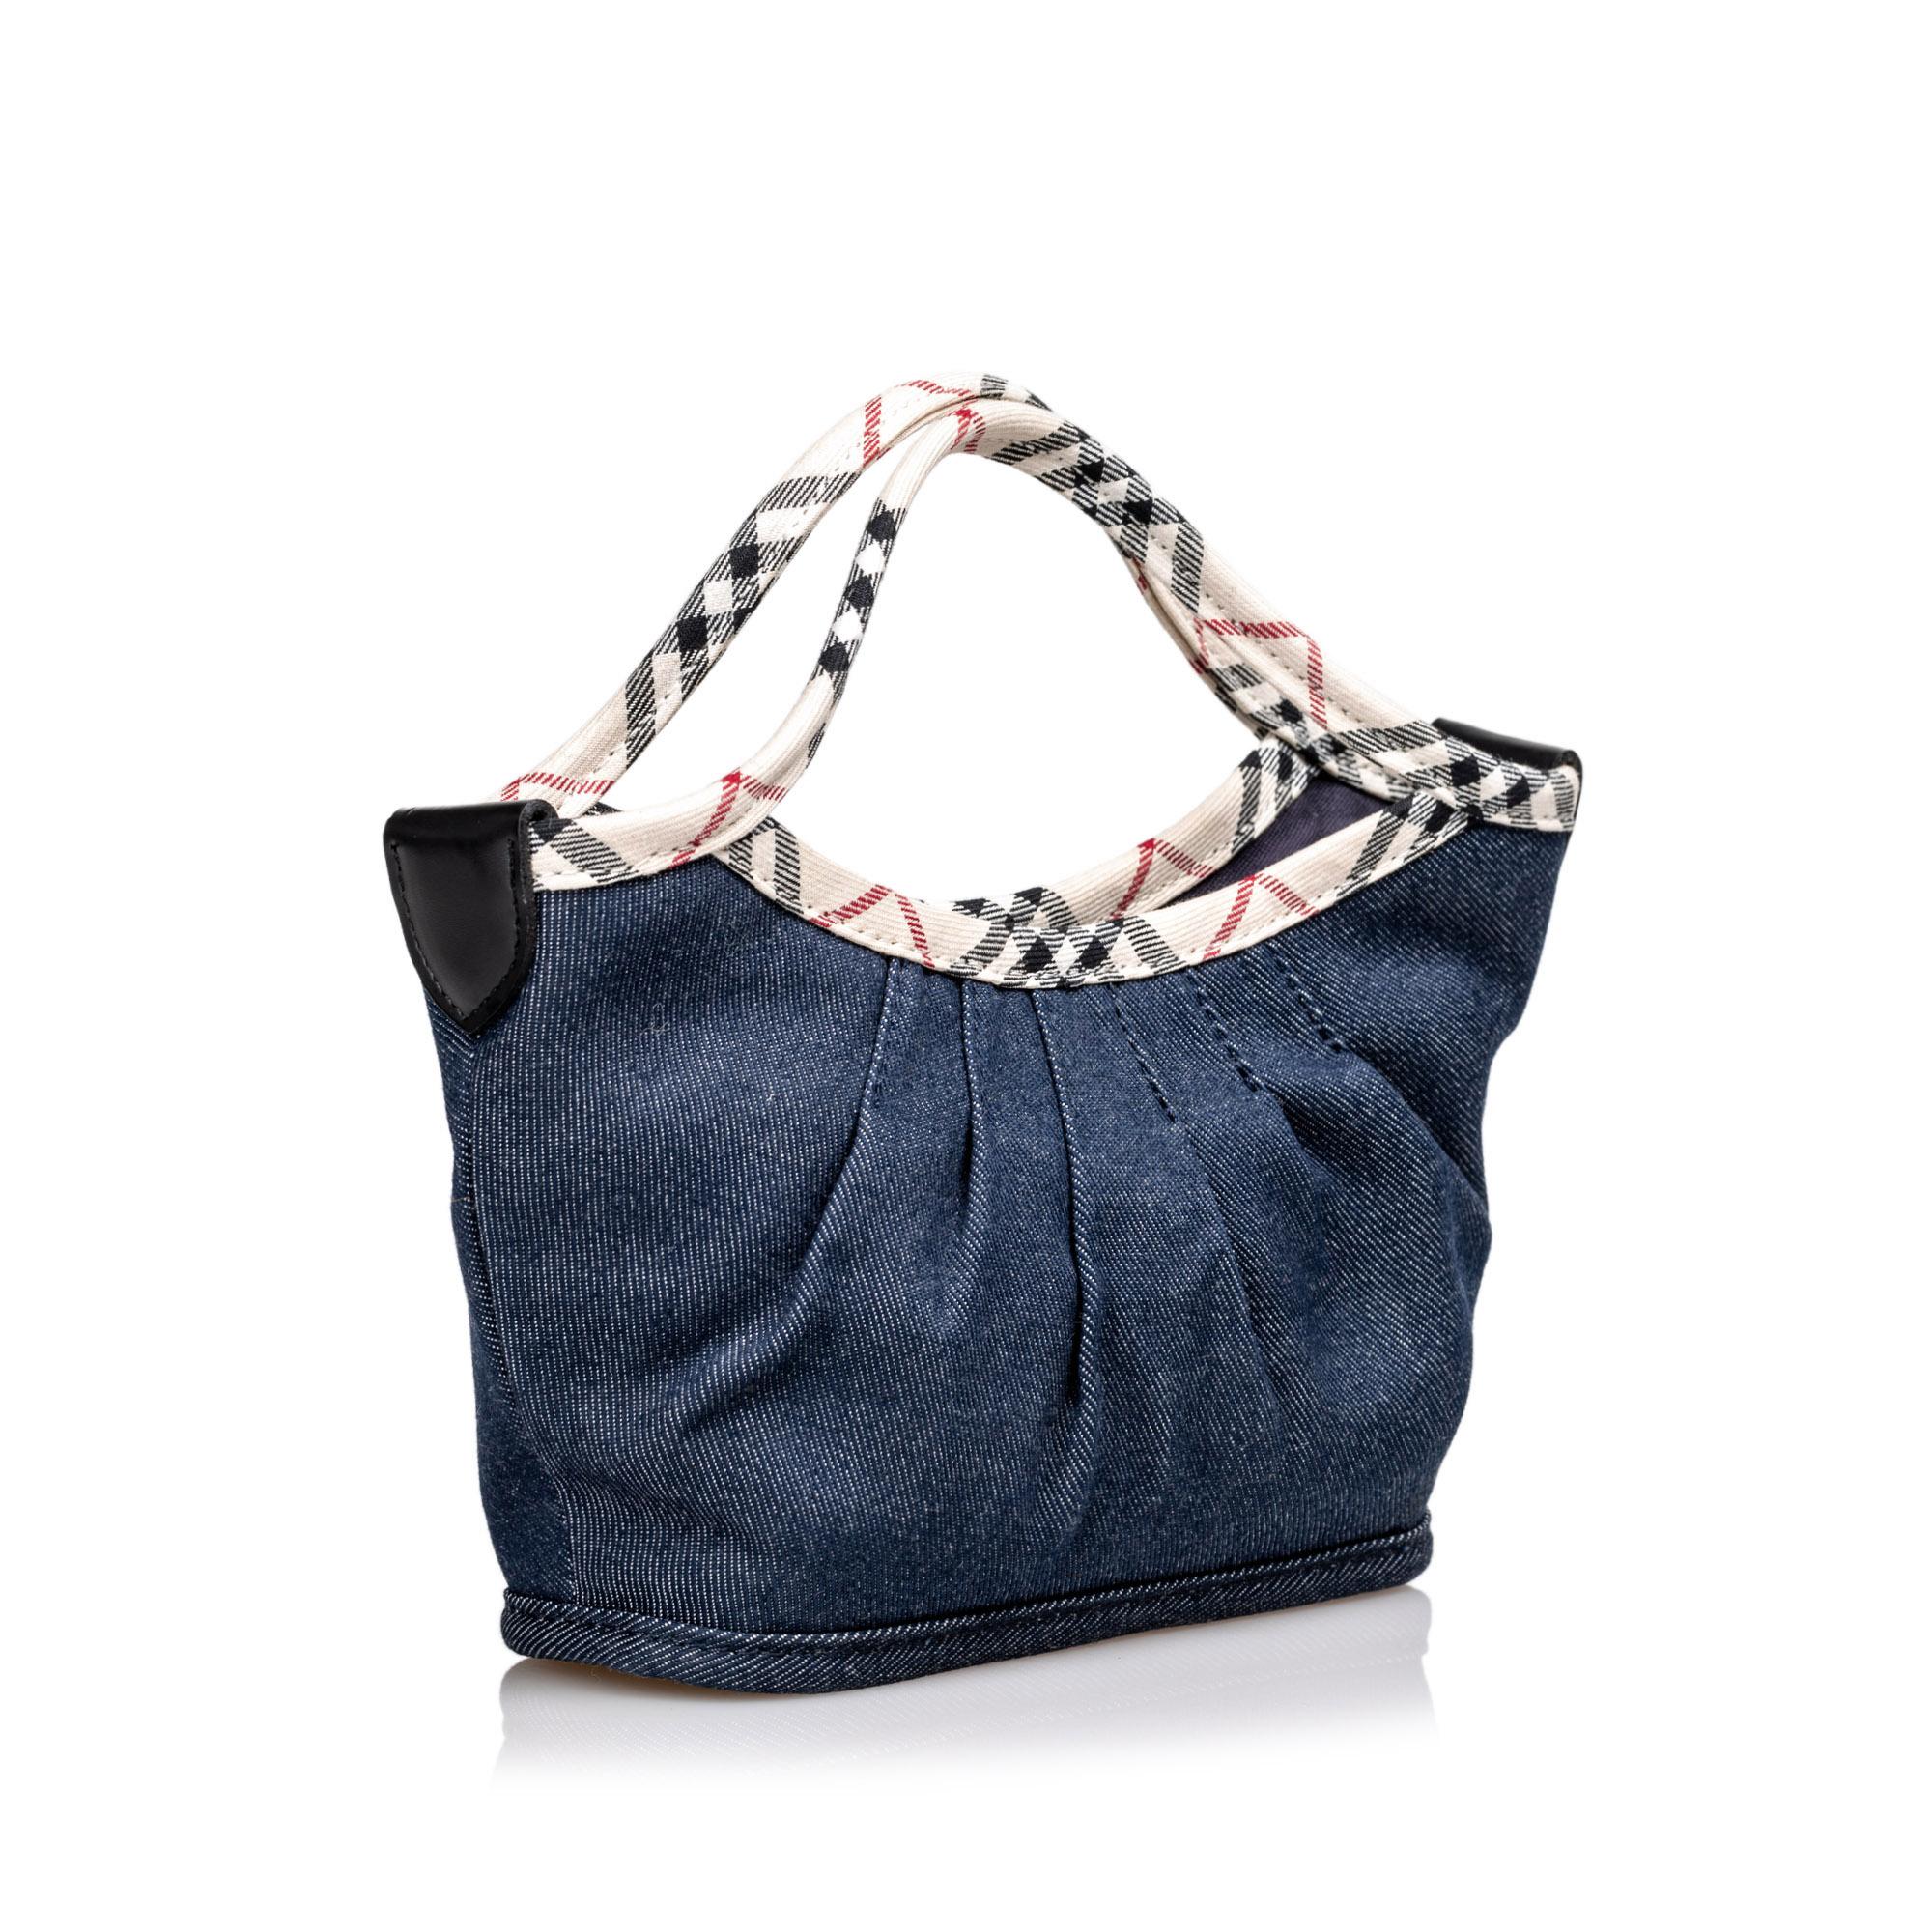 This handbag features a denim body with house check detail, flat handles, an open top with a magnetic closure, and an interior slip pocket. It carries as AB condition rating.

Inclusions: 
This item does not come with